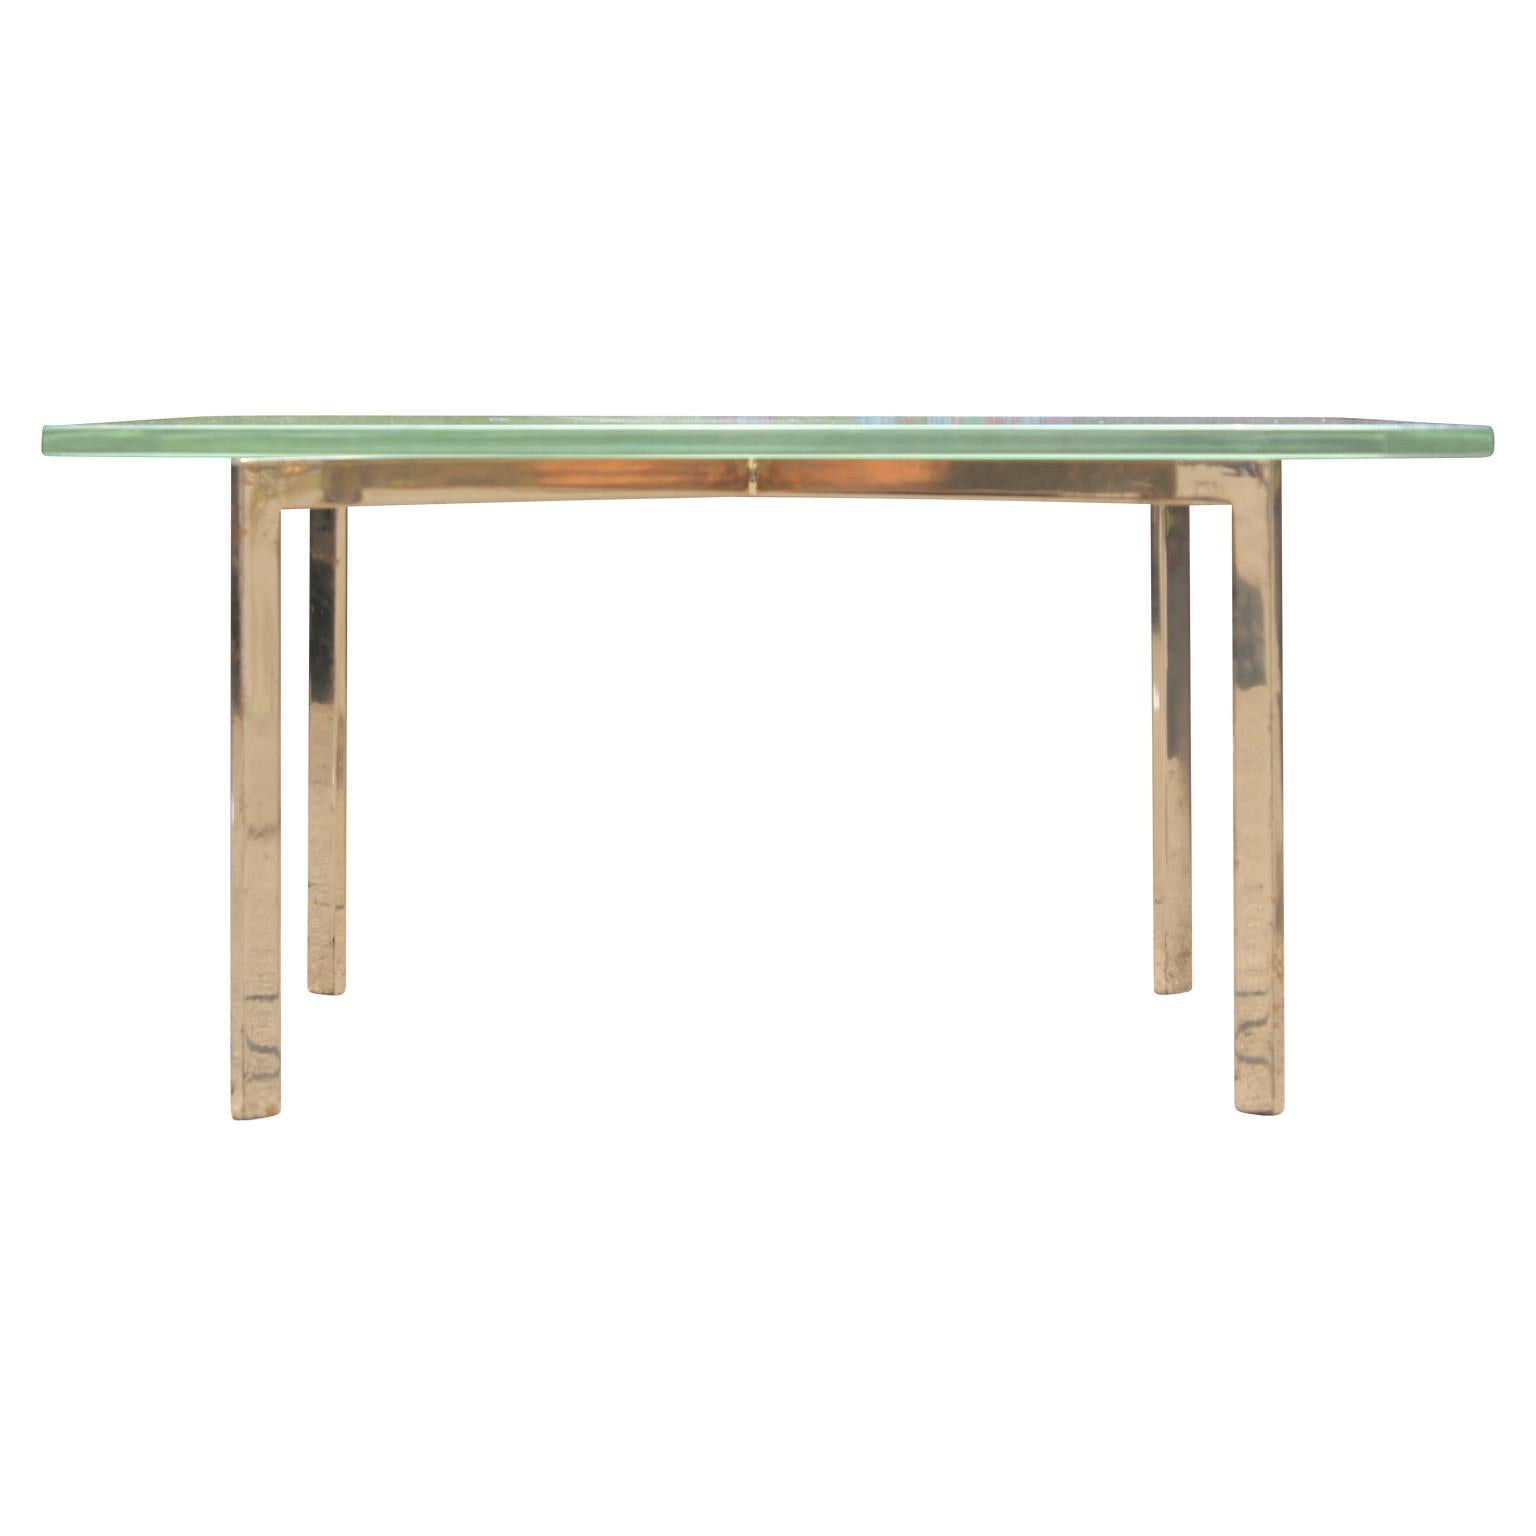 Gorgeous modern Hollywood Regency solid brass and glass Barcelona coffee table by Mies Van der Rohe for Knoll.